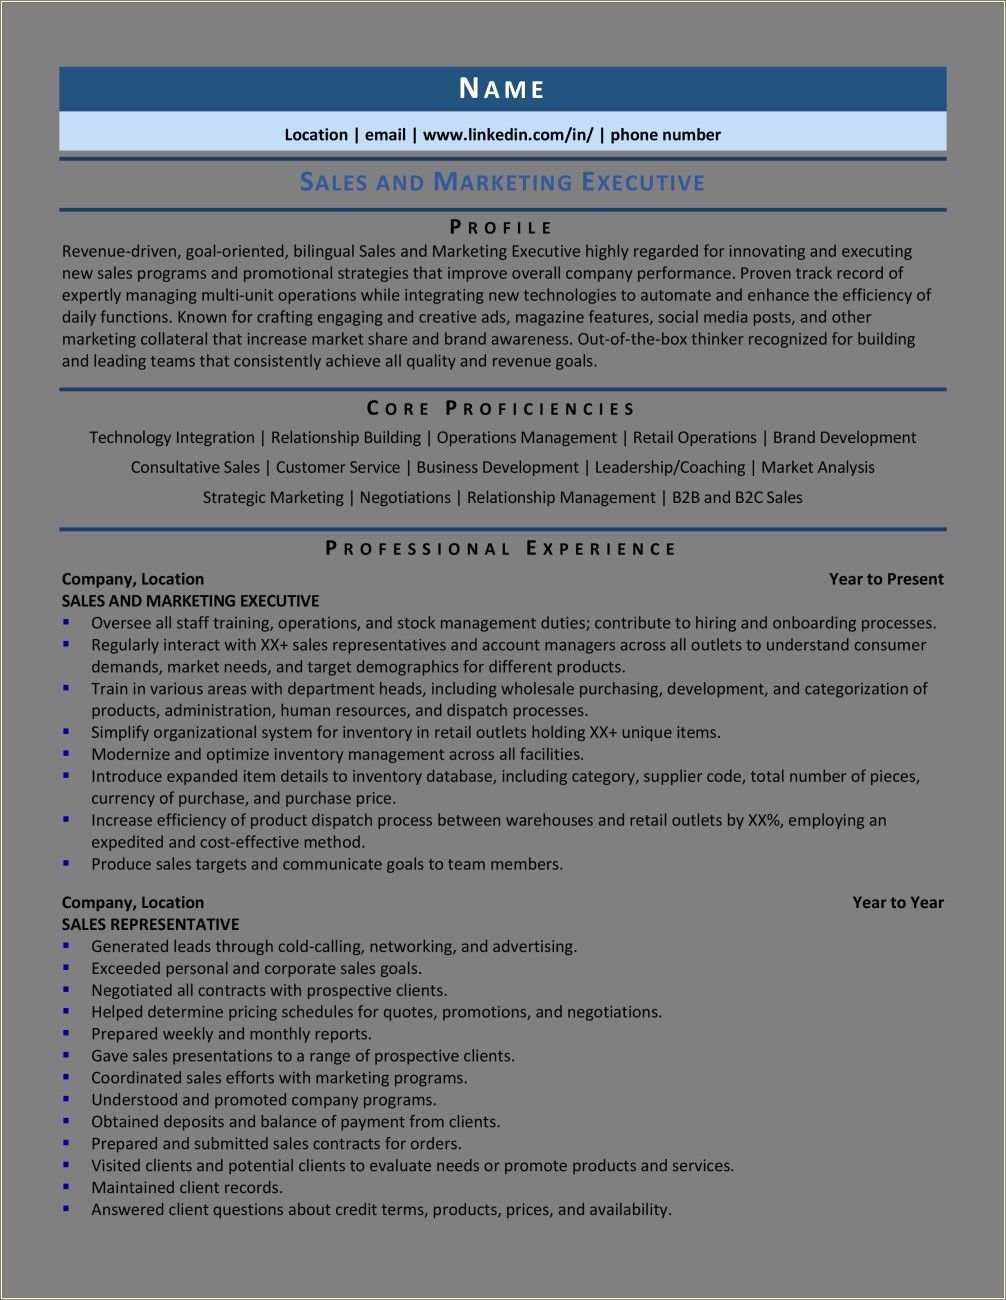 Sample Resume For Vp Of Sales And Marketing